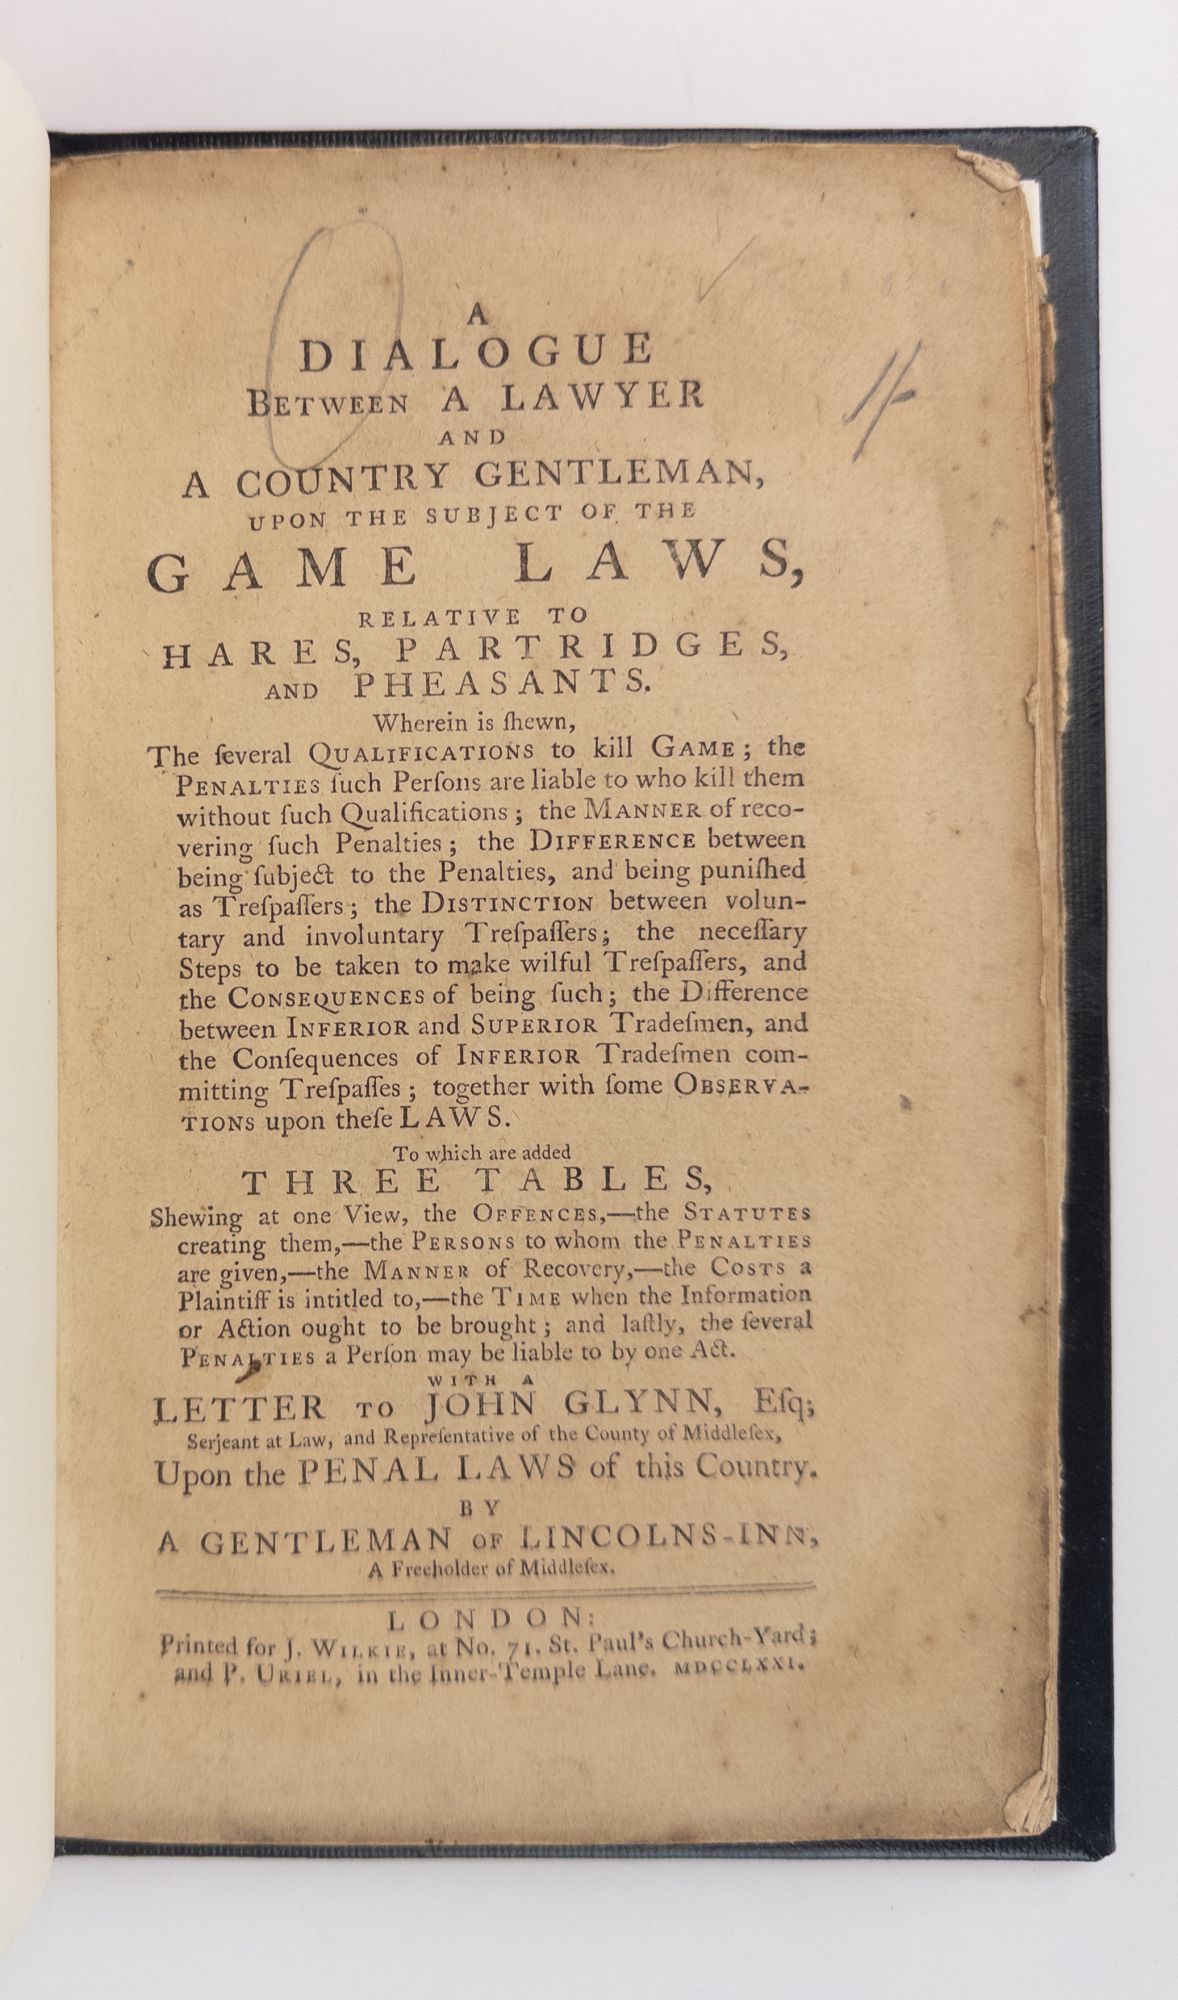 Product Image for A DIALOGUE BETWEEN A LAWYER AND A COUNTRY GENTLEMAN, UPON THE SUBJECT OF THE GAME LAWS, RELATIVE TO HARES, PARTRIDGES, AND PHEASANTS. WHEREIN IS SHEWN, THE SEVERAL QUALIFICATIONS TO KILL GAME; THE PENALTIES SUCH PERSONS ARE LIABLE TO WHO KILL THEM WITHOUT